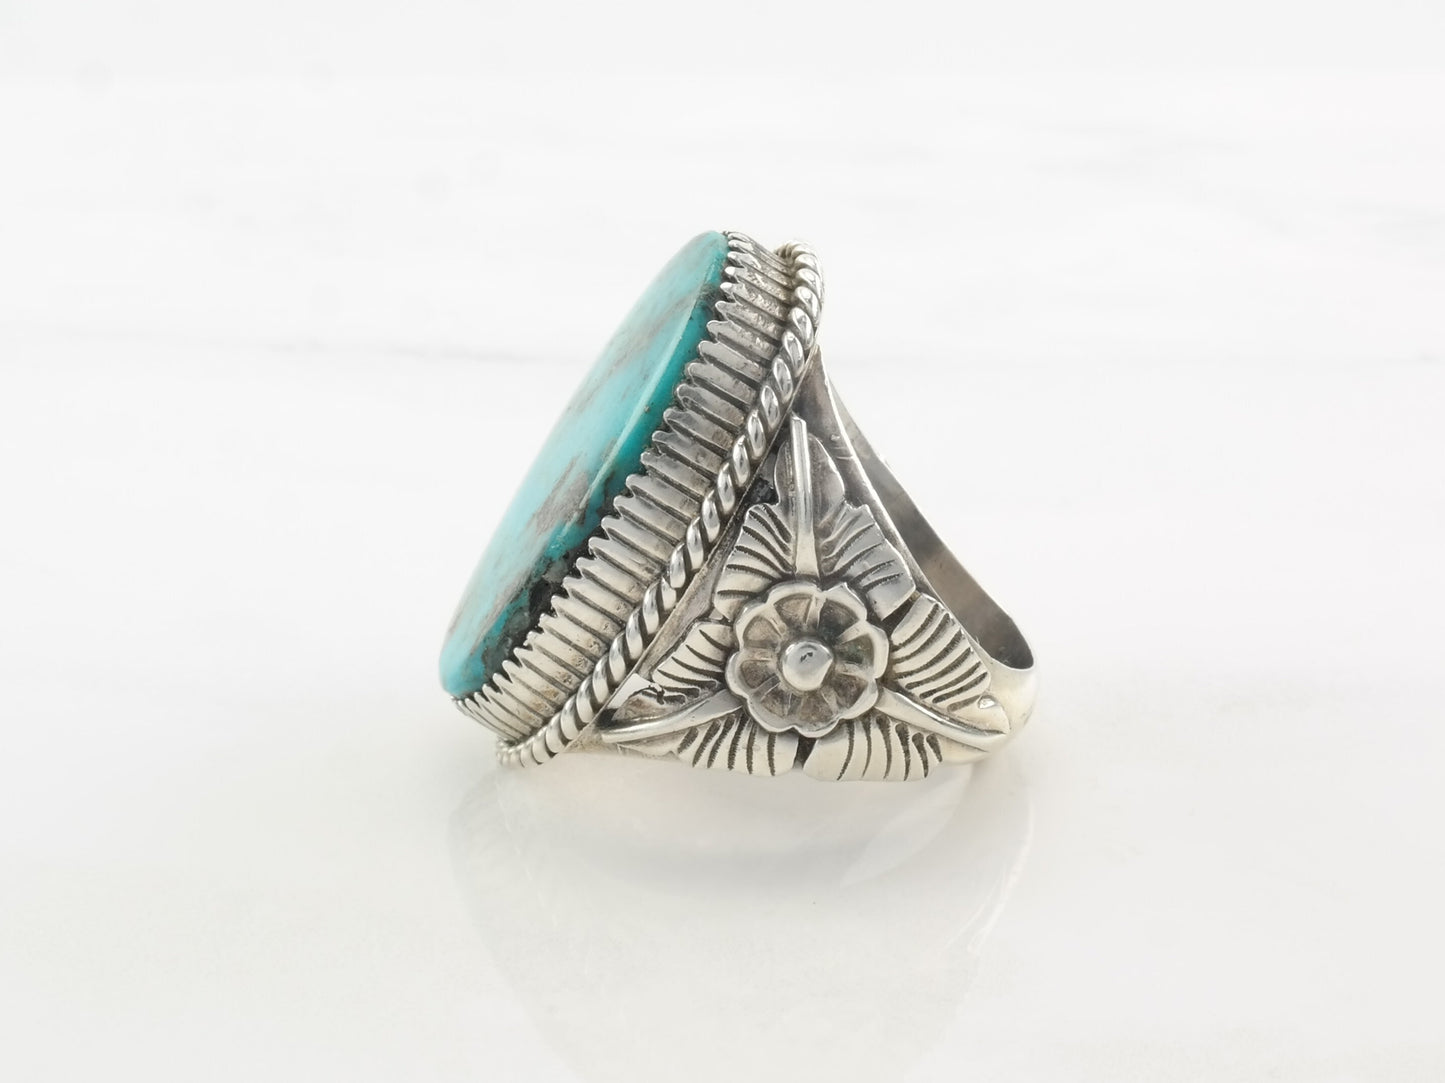 Vintage Native American Silver Ring Turquoise, Oval, Floral Sterling Size 10 3/4